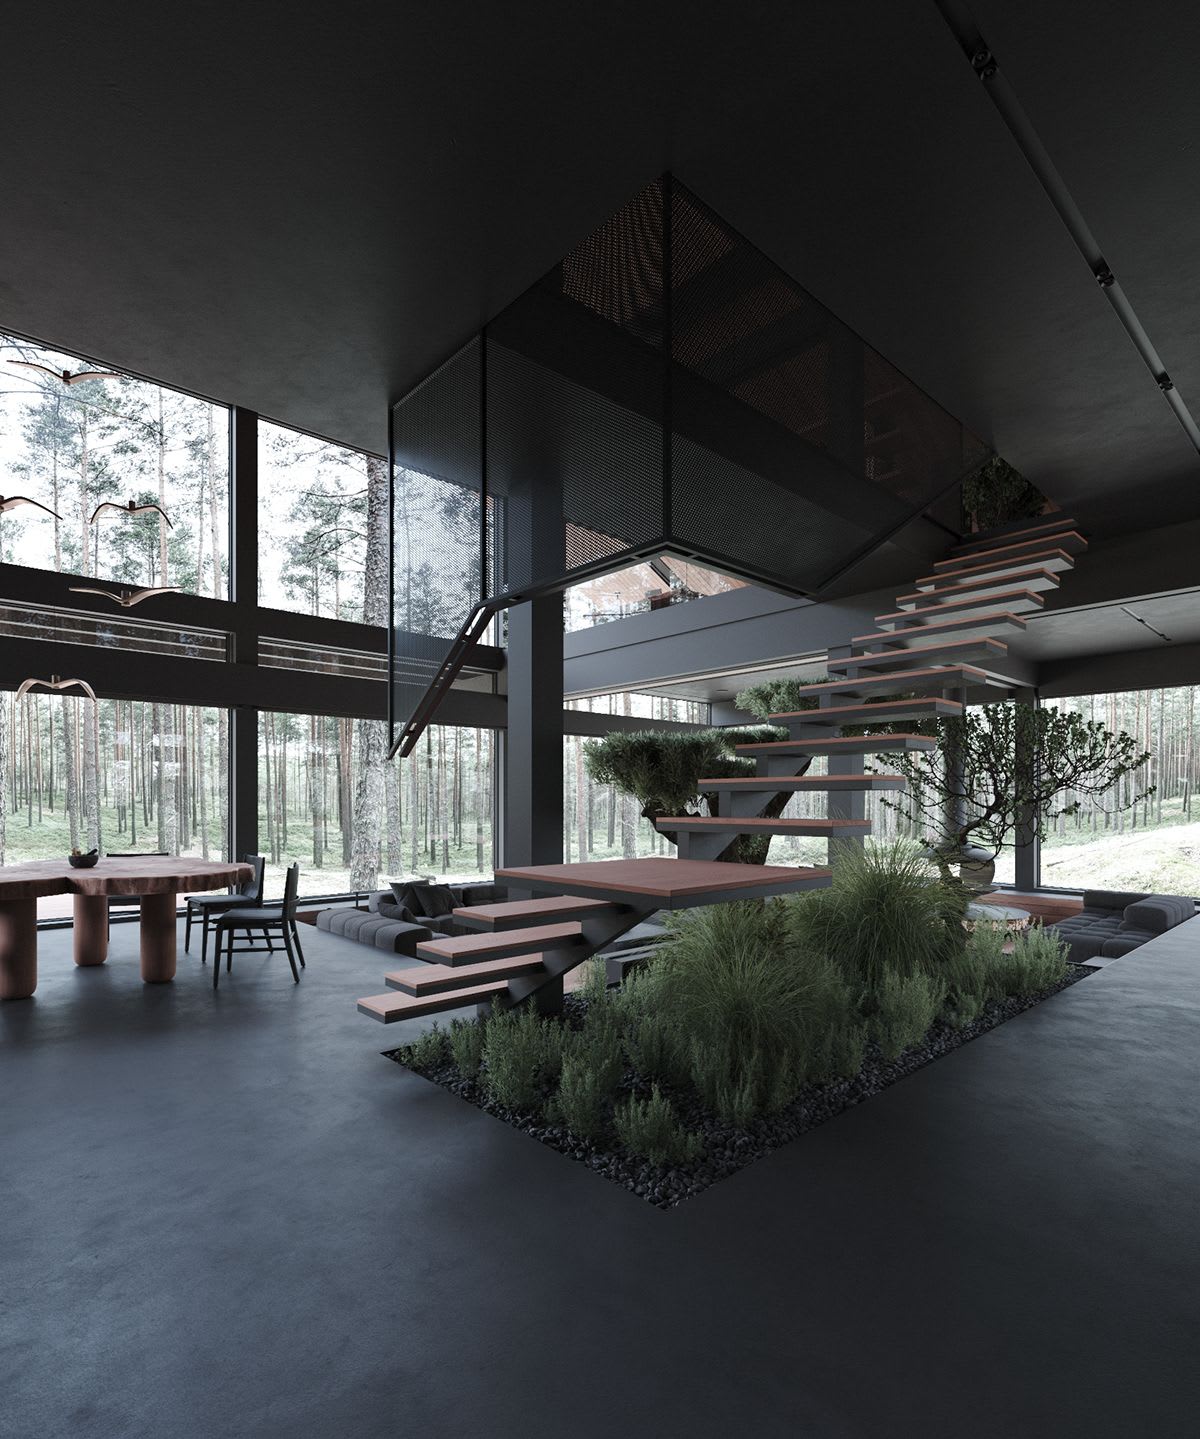 Moscow #house in the woods design & visualization by Stephen Tsymbaliuk Stephen Tsymba… | House architecture design, Luxury homes dream houses, Dream house exterior